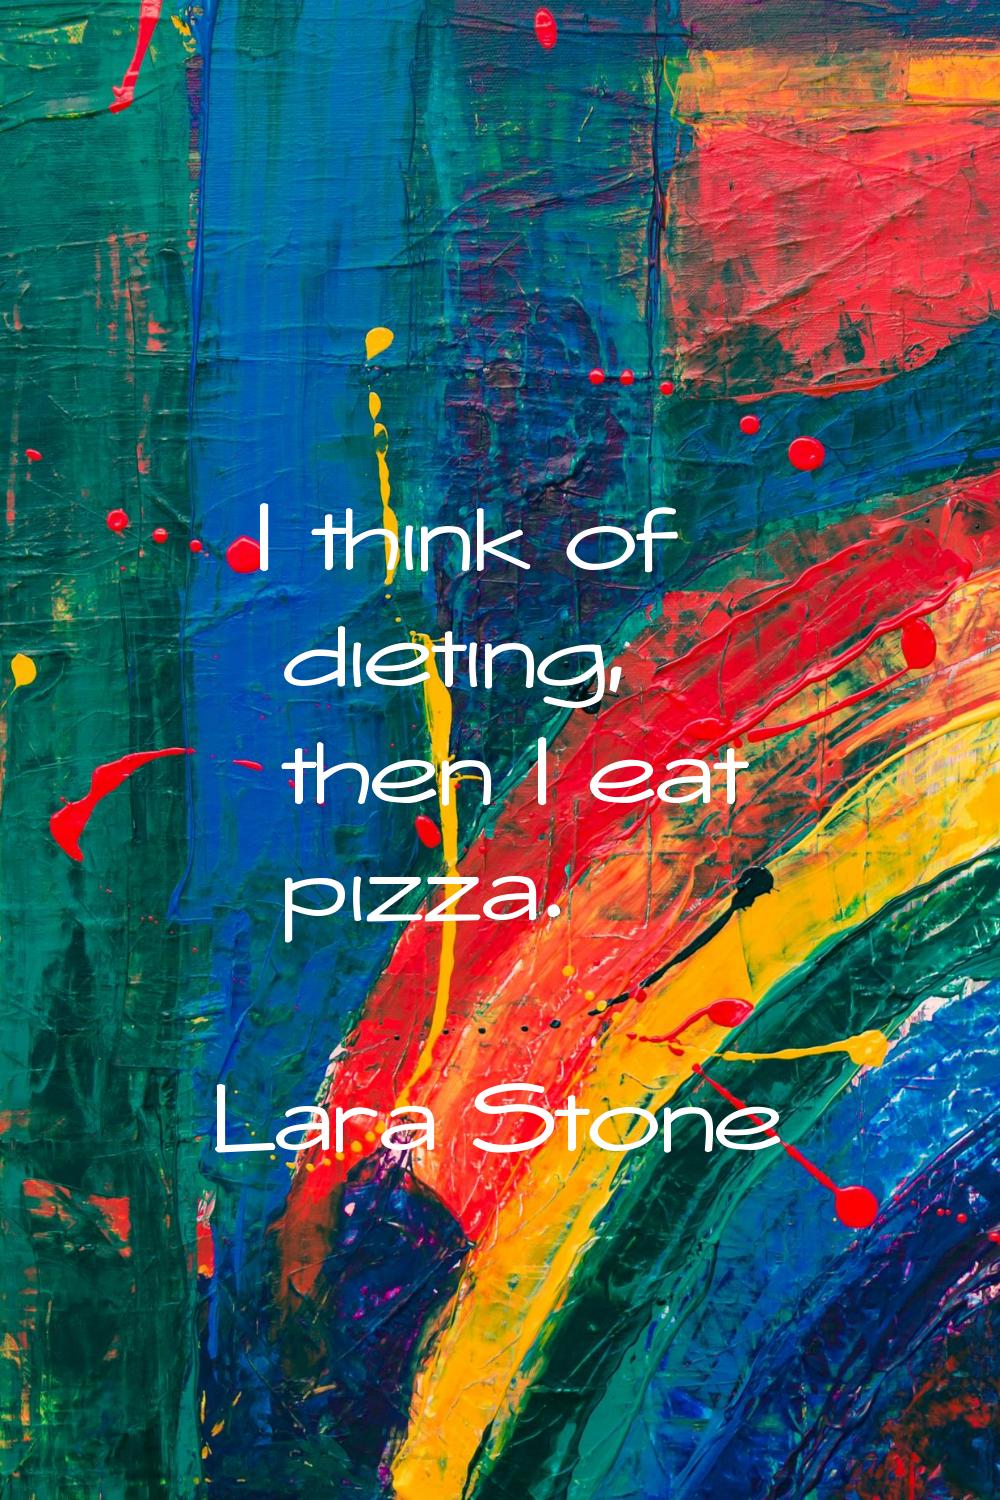 I think of dieting, then I eat pizza.